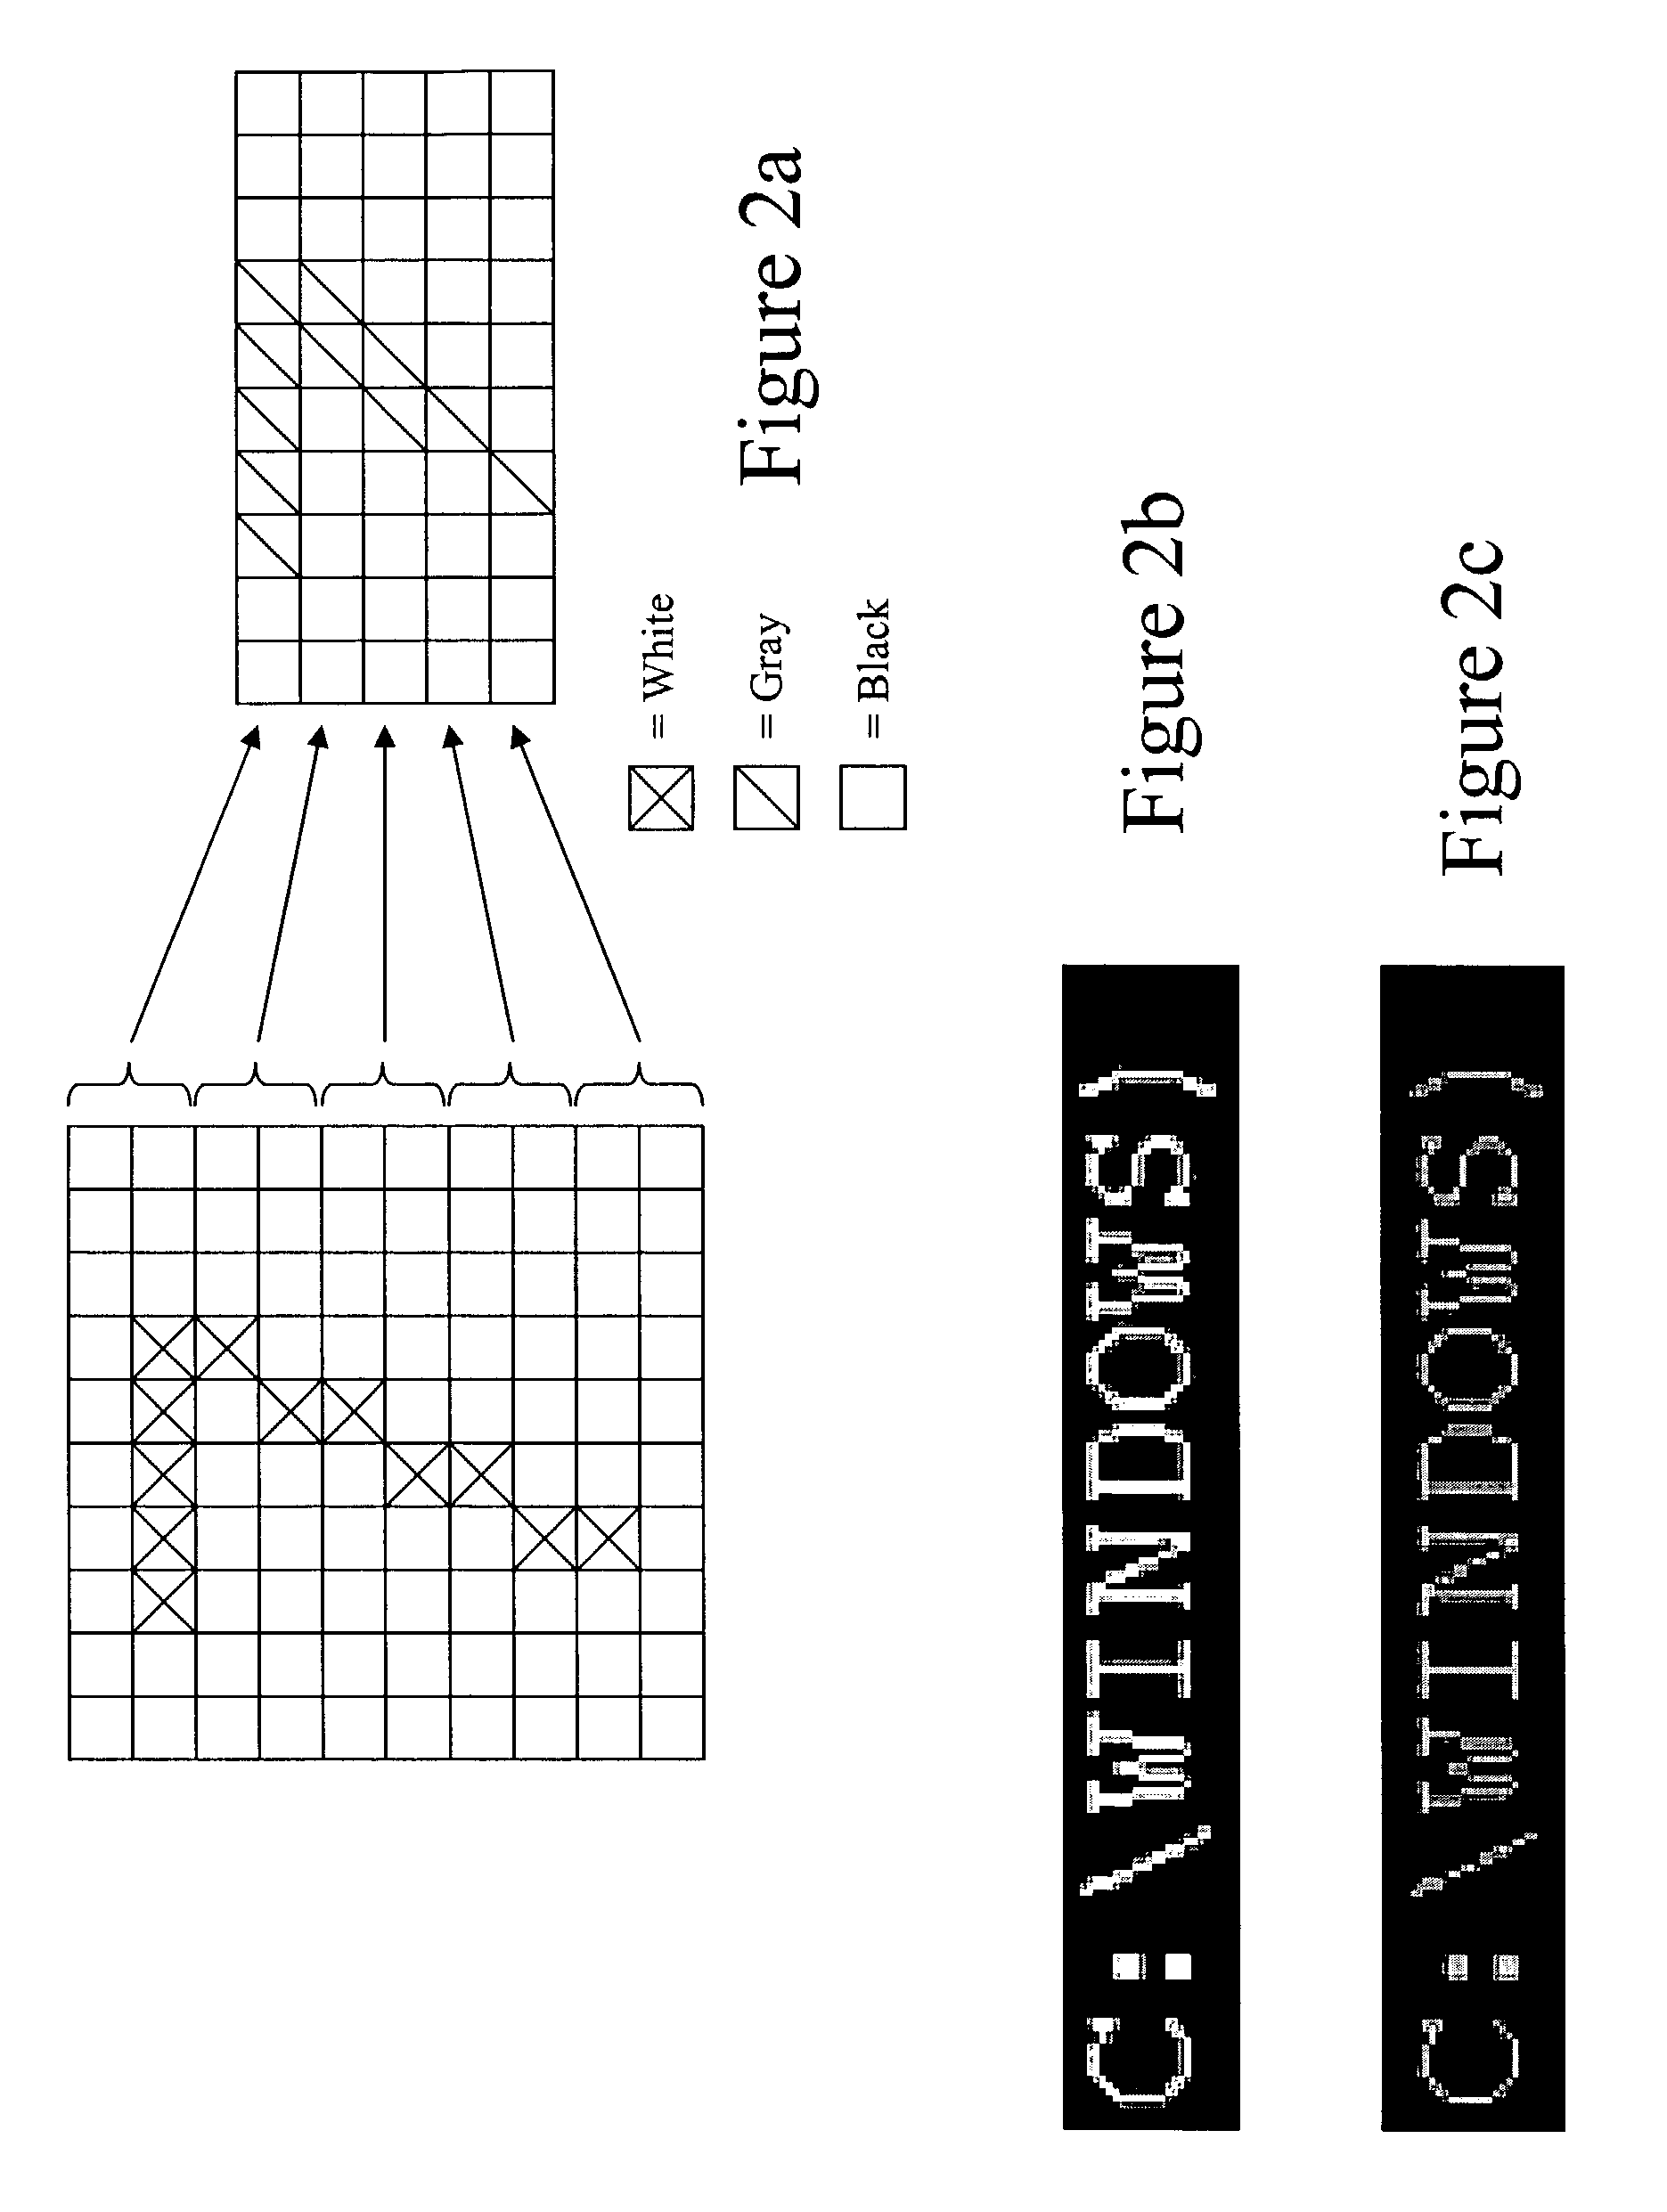 Video/graphics text mode enhancement method for digitally processed data